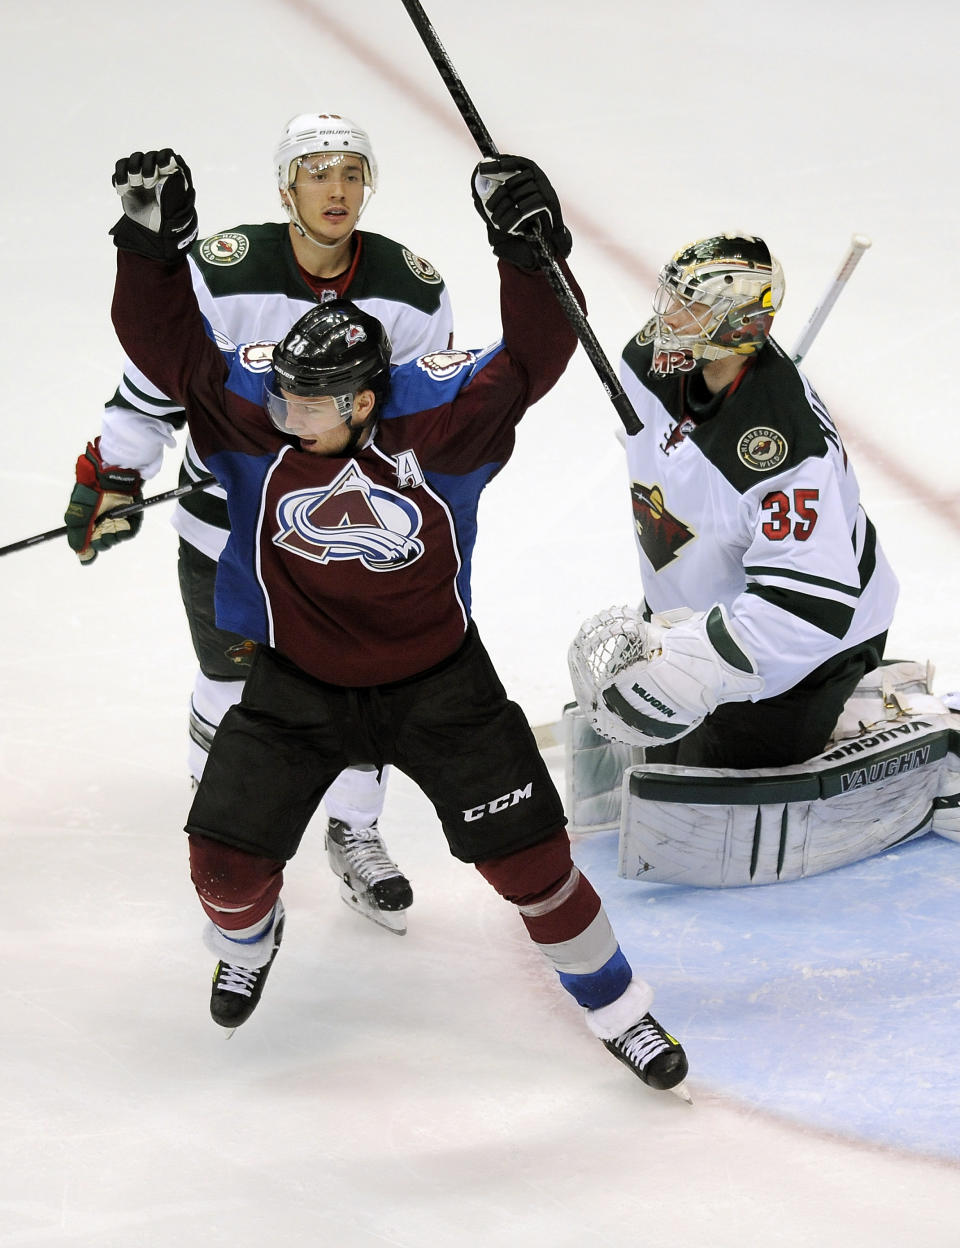 Colorado Avalanche center Paul Stastny, front left, celebrates a game-winning goal by Nathan MacKinnon as Minnesota Wild defenseman Jared Spurgeon, rear, and goalie Darcy Kuemper, right, look on in overtime in Game 5 of an NHL hockey first-round playoff series on Saturday, April 26, 2014, in Denver. The Avalanche won 4-3. (AP Photo/Chris Schneider)